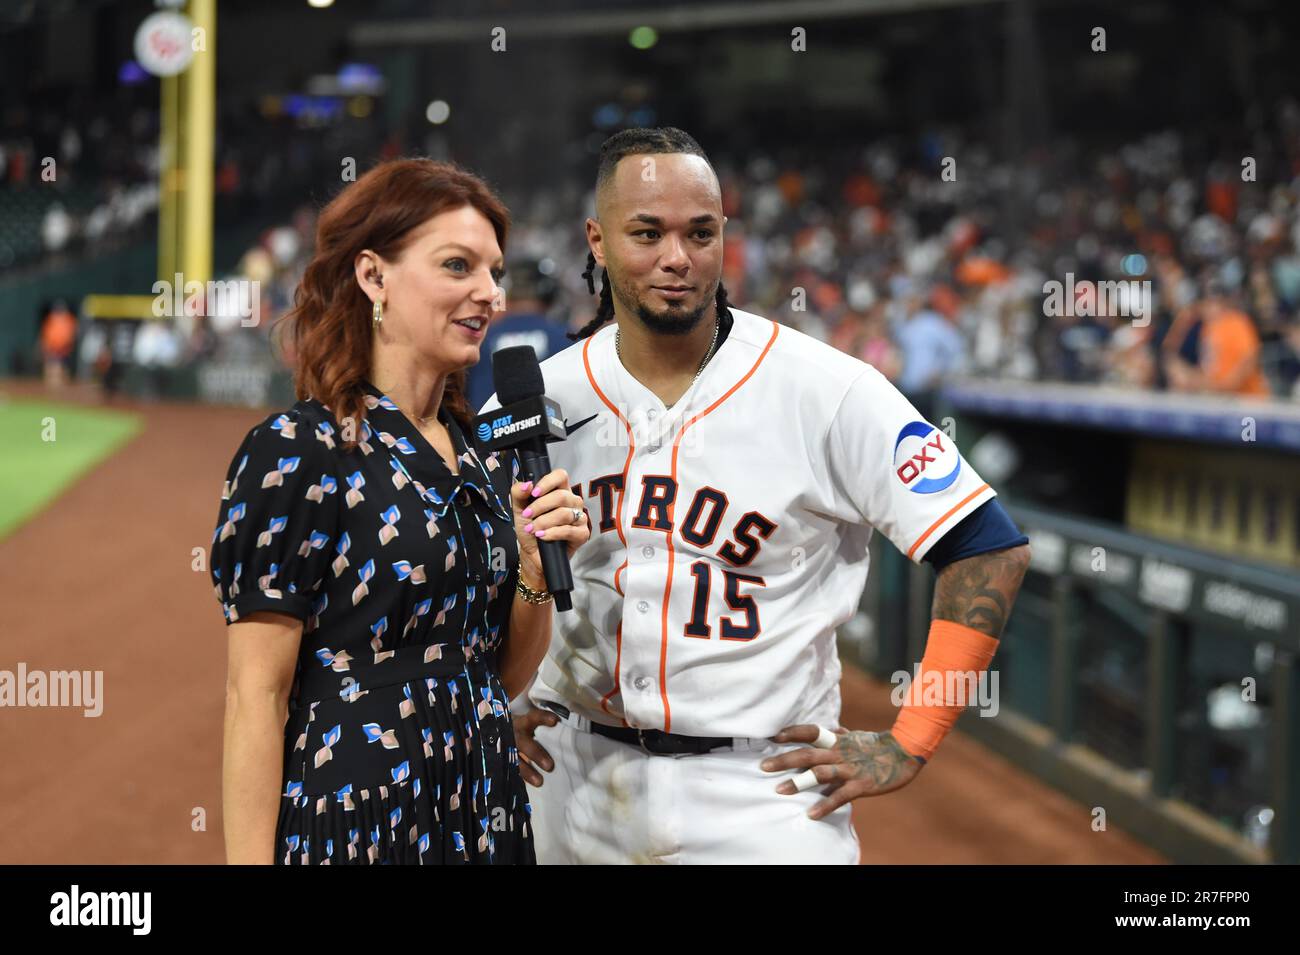 Houston Astros mascot Orbit has some fun with Julia Morales before the MLB  game between the Houston Astros and the New York Mets on Tuesday, June 21,  2022 at Minute Maid Park